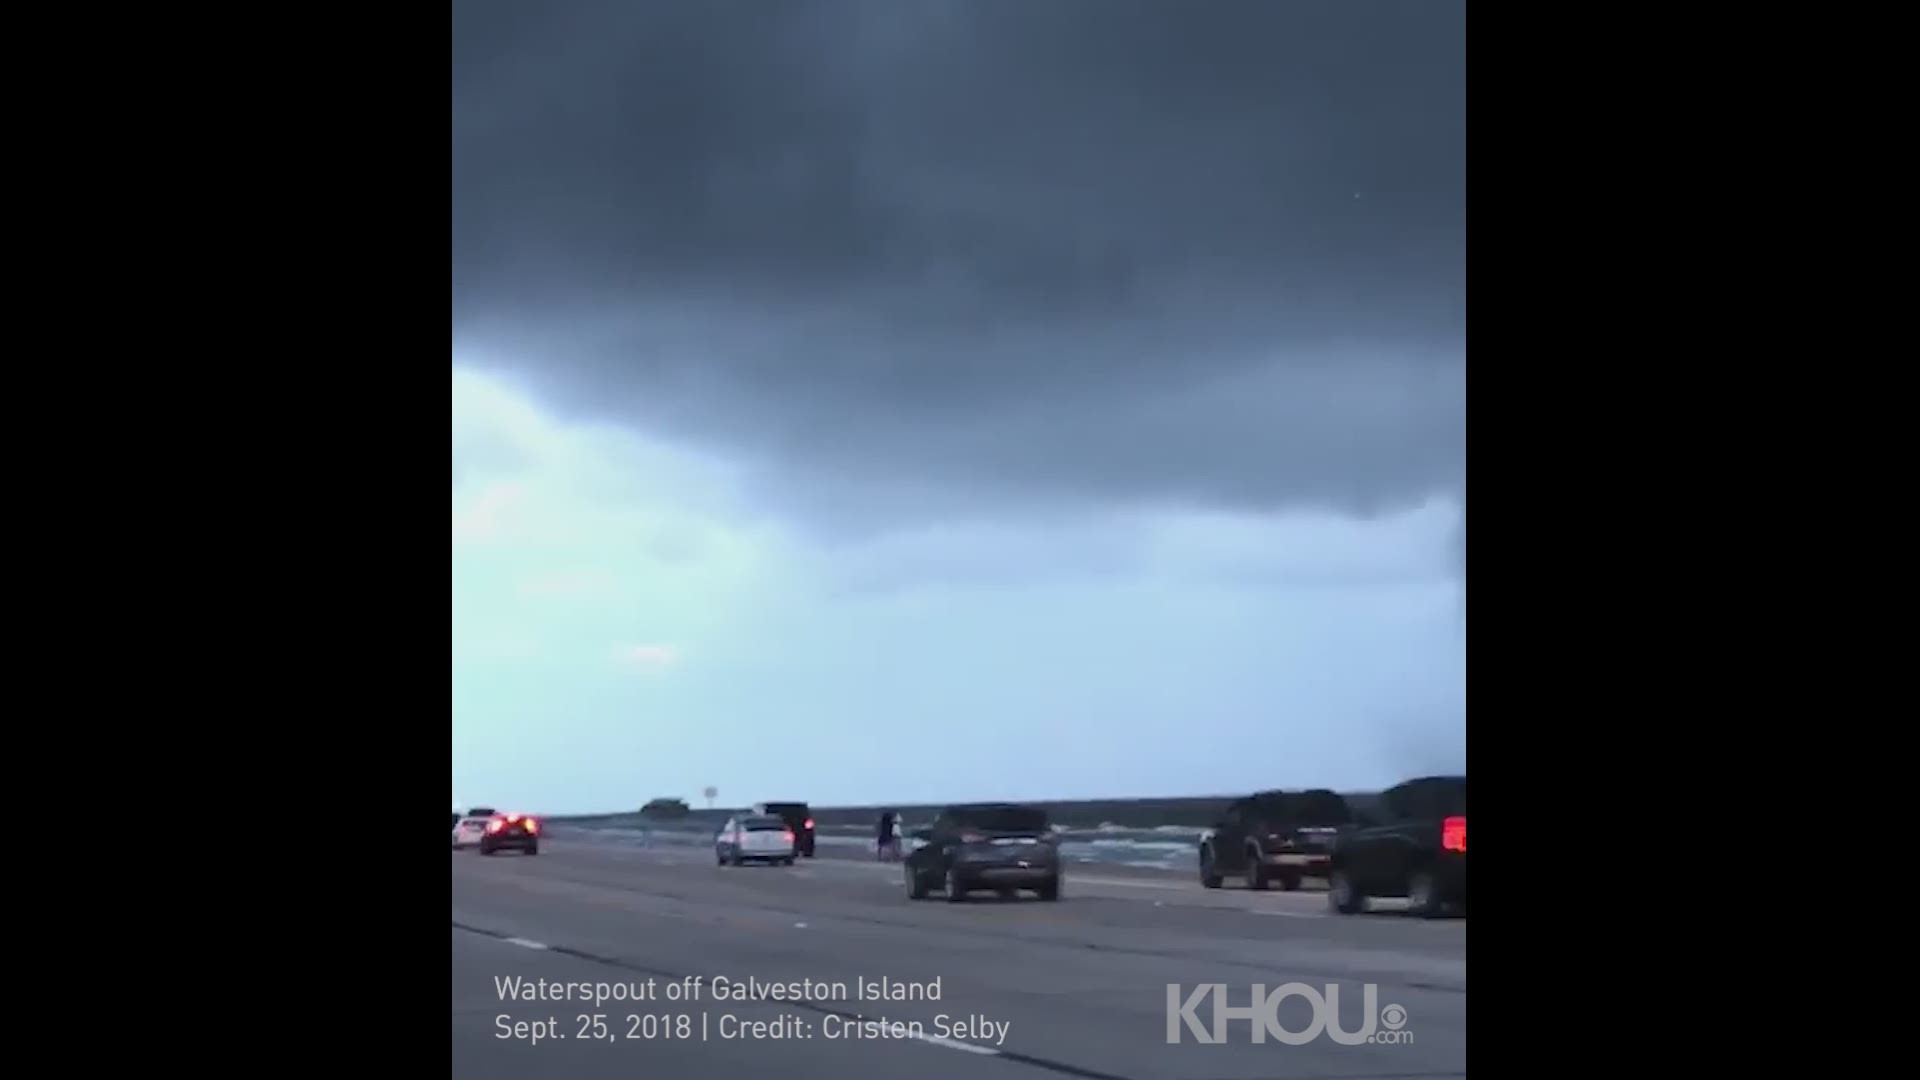 KHOU 11 viewers sent in photos and videos of a waterspout off Galveston Island before 8 a.m. Tuesday, Sept. 25, 2018. There is an increased chance of storms and rain across Houston for the next few days.